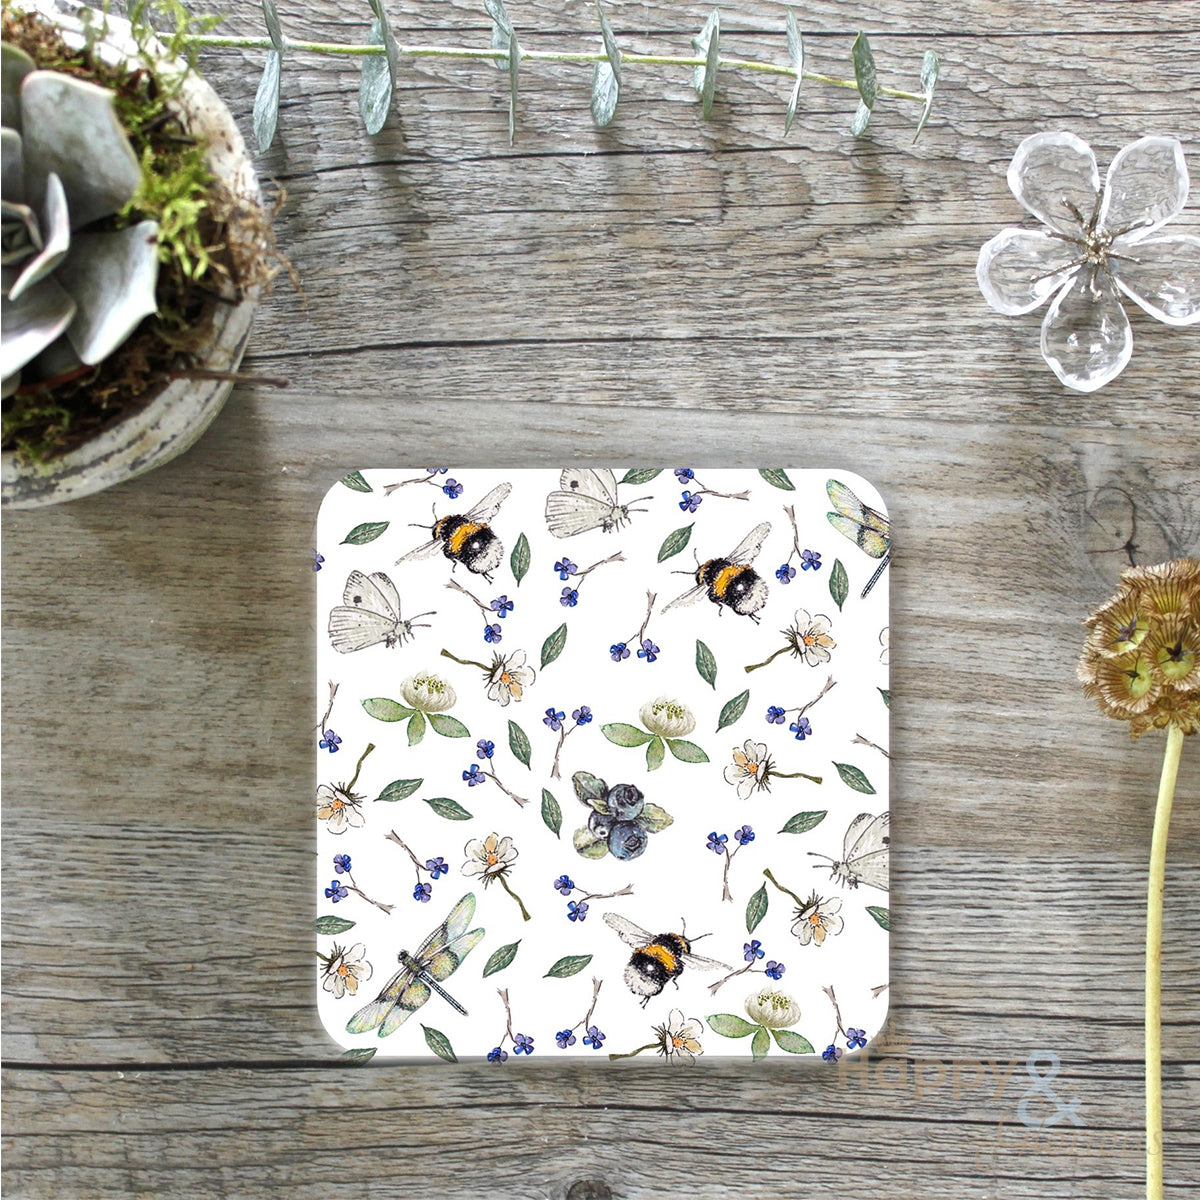 Bees & wild flowers set of four coasters